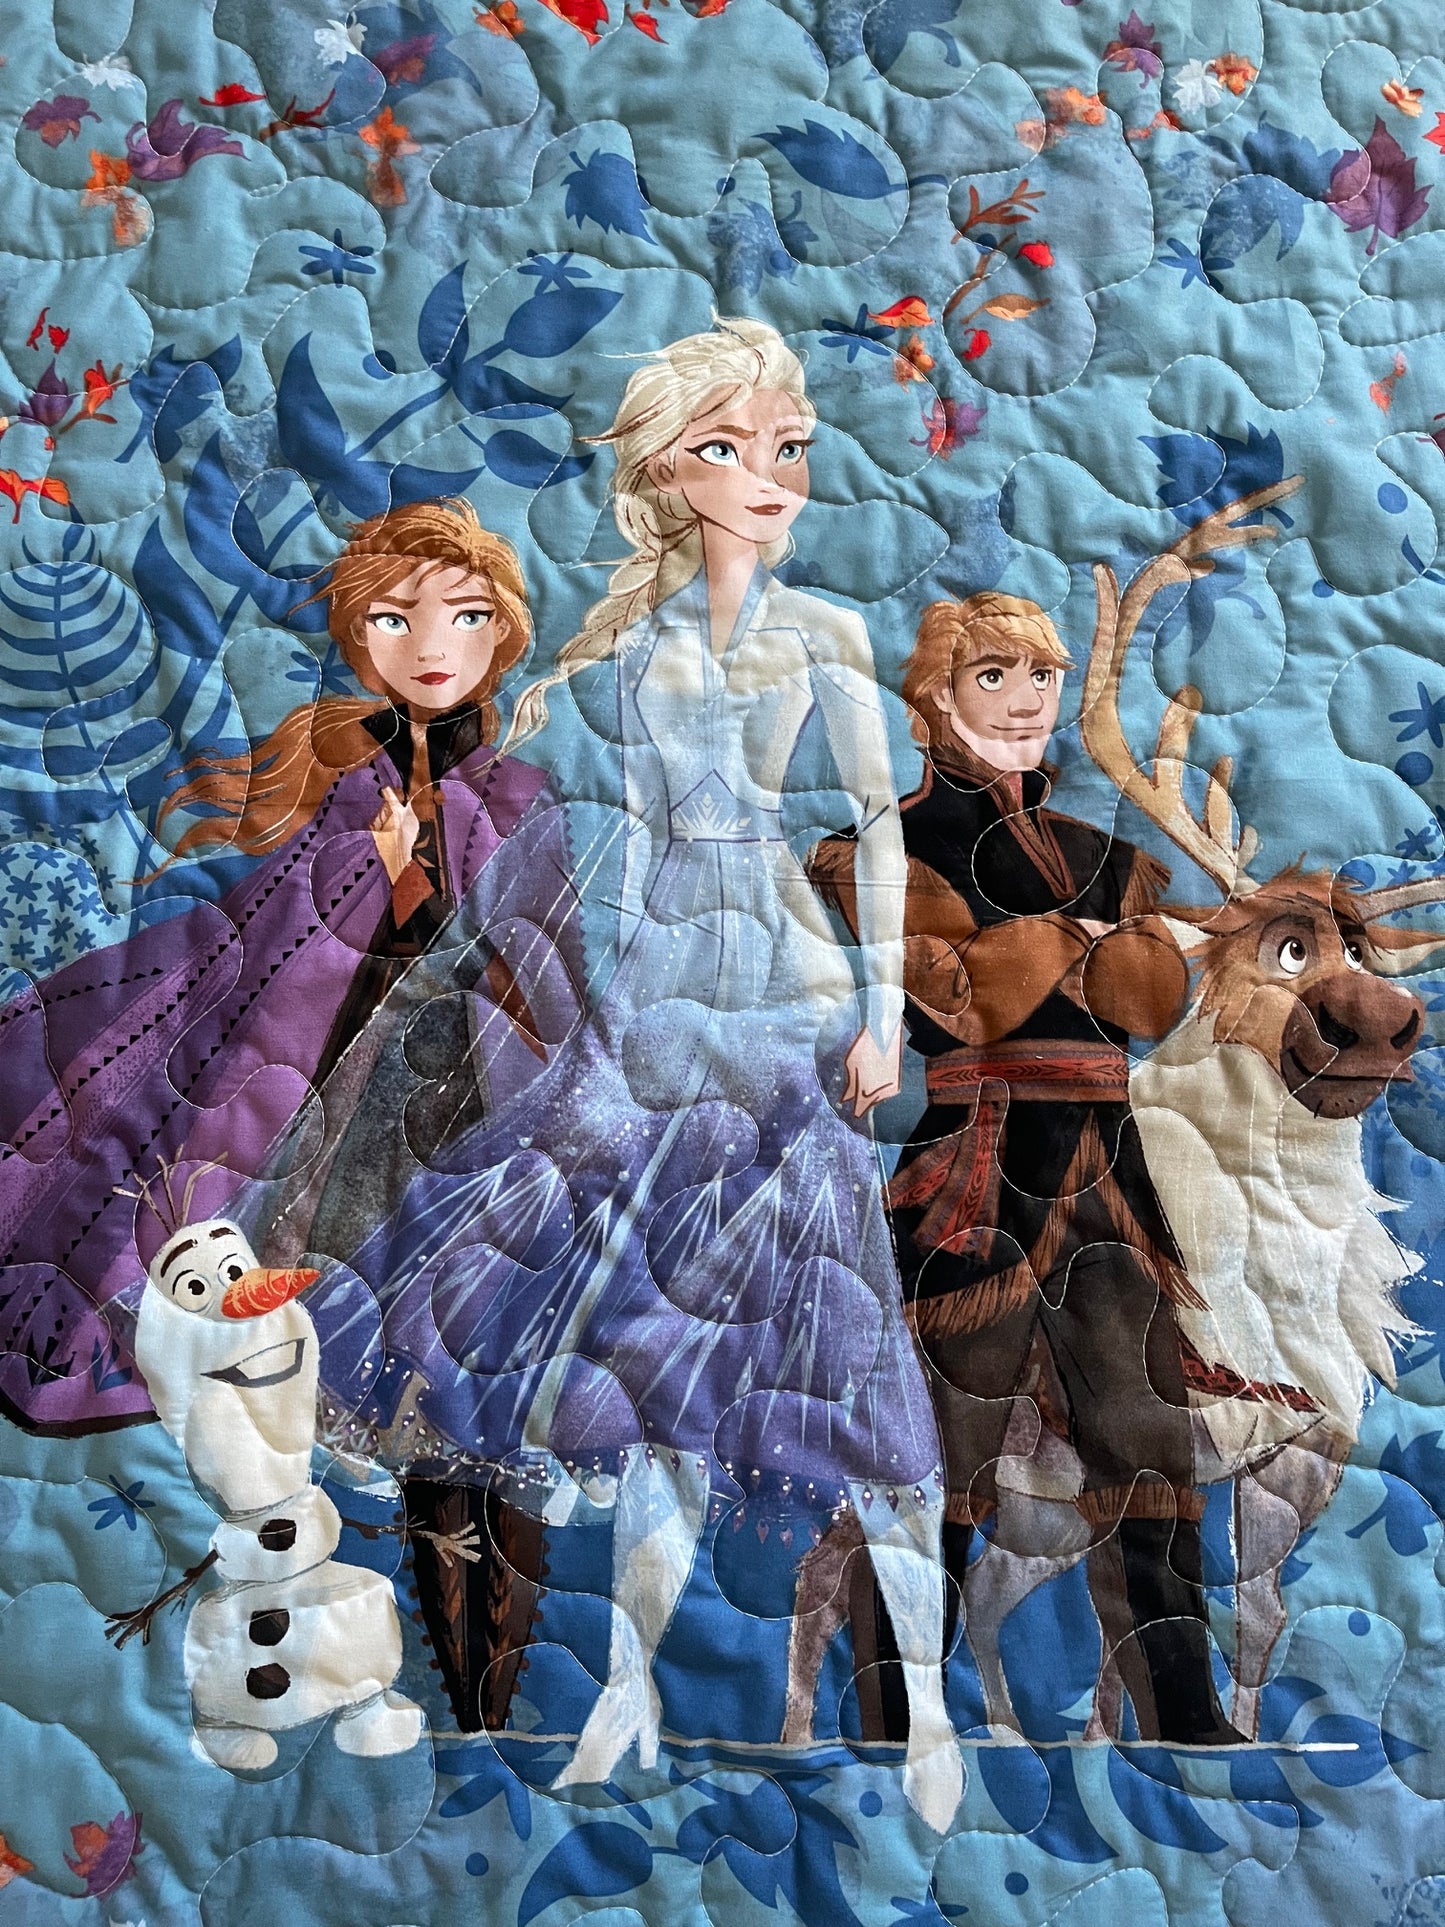 DISNEY FROZENS SISTERS ANNA ELSA OLAF KRISTOFF Inspired Quilted Blanket